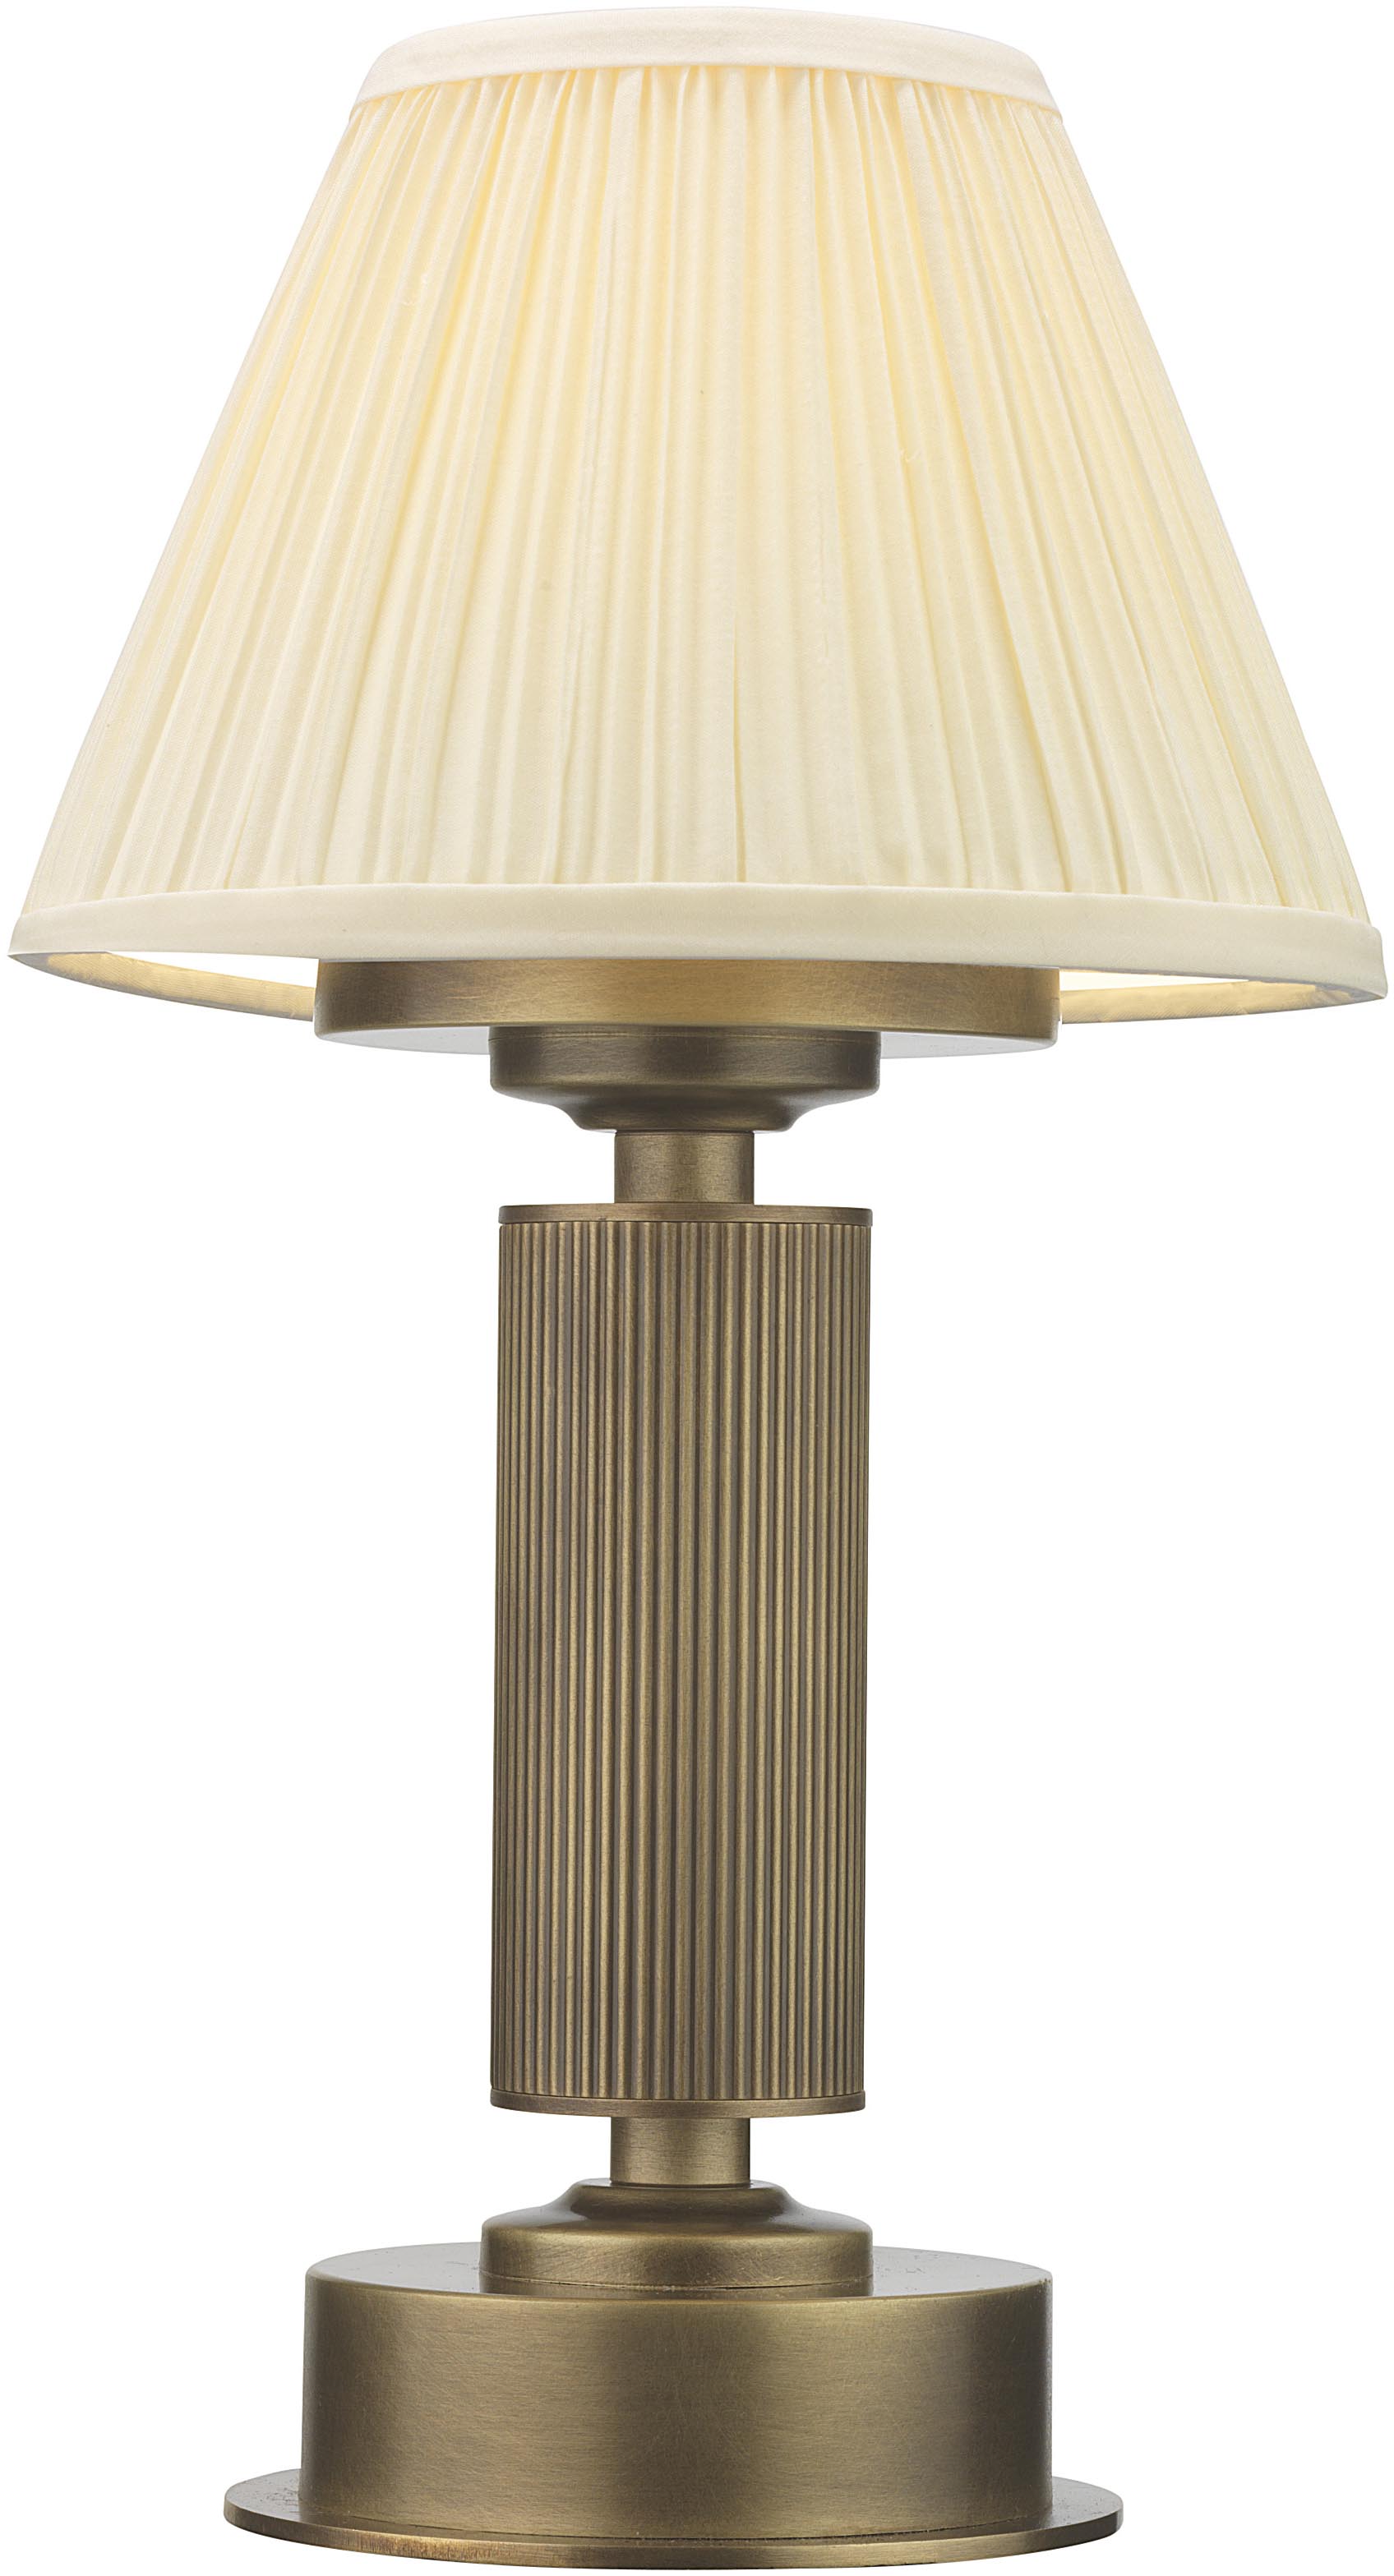 Barham rechargeable table lamp by Northern Lights features a rechargeable LED light, brass base and empire or drum shades.